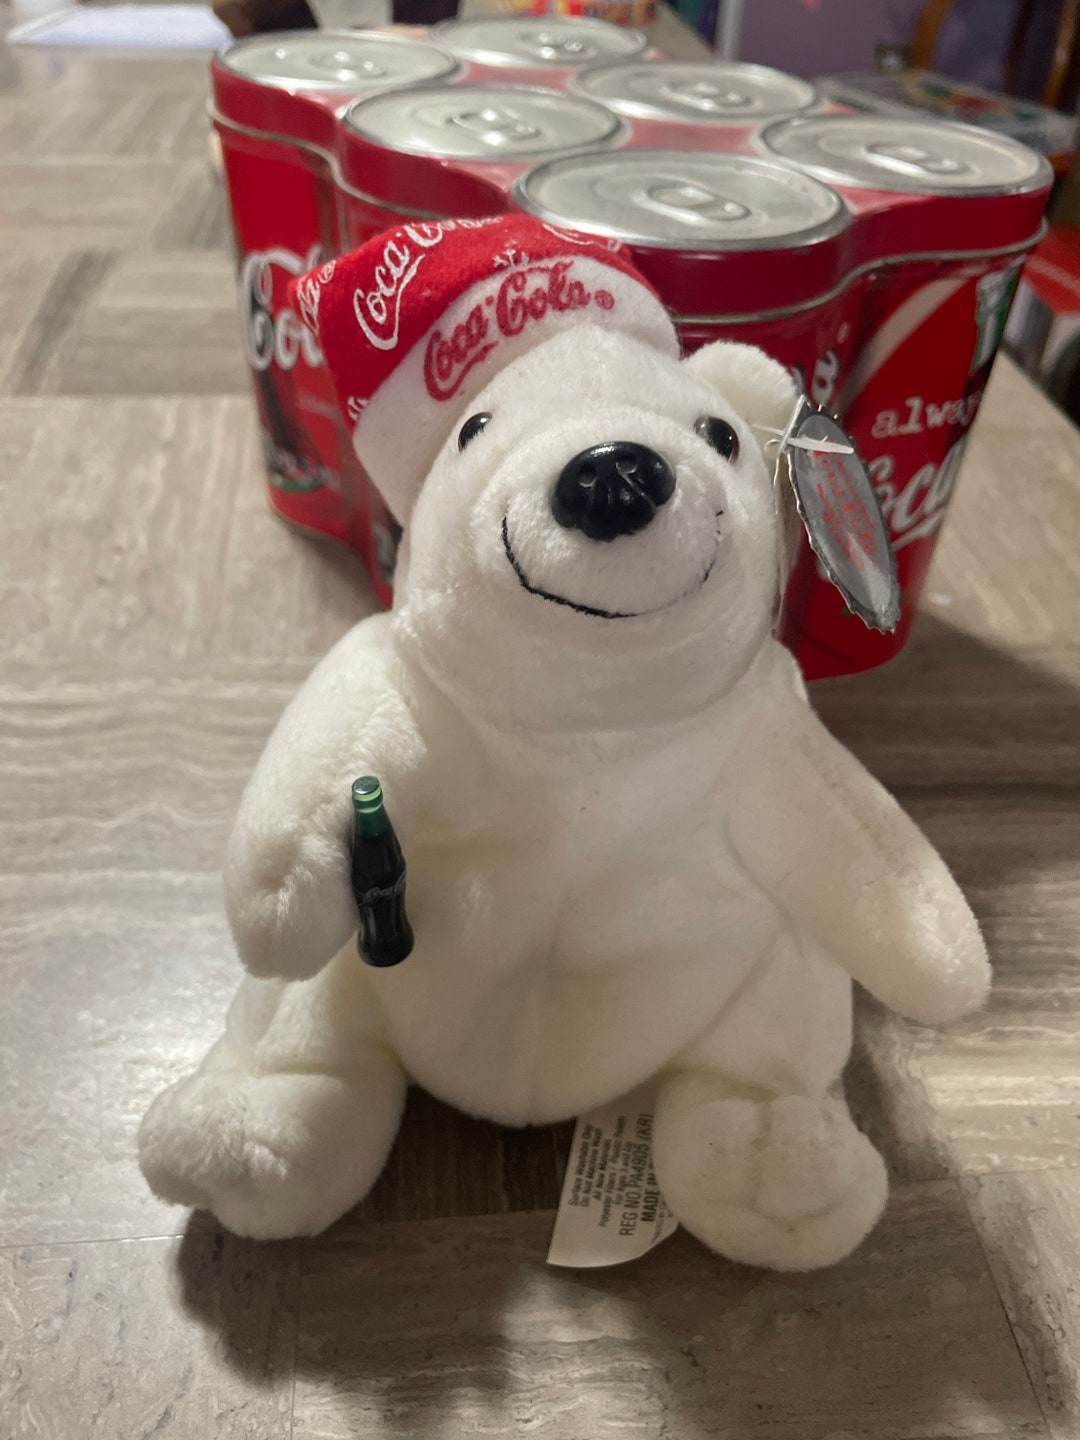 Polar Bear Stuffed Animal 17 Inches Long with Zipper Pouch, 1998